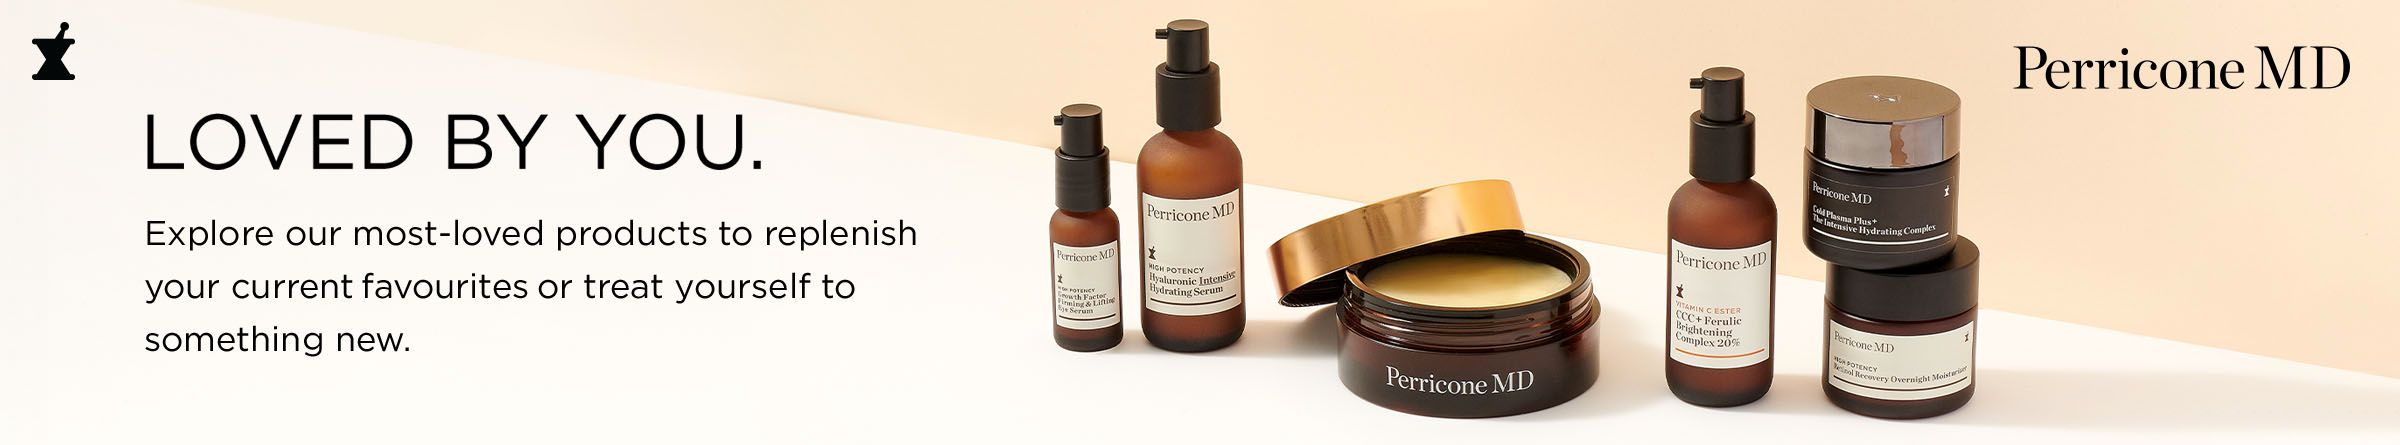 Perricone MD brand banner